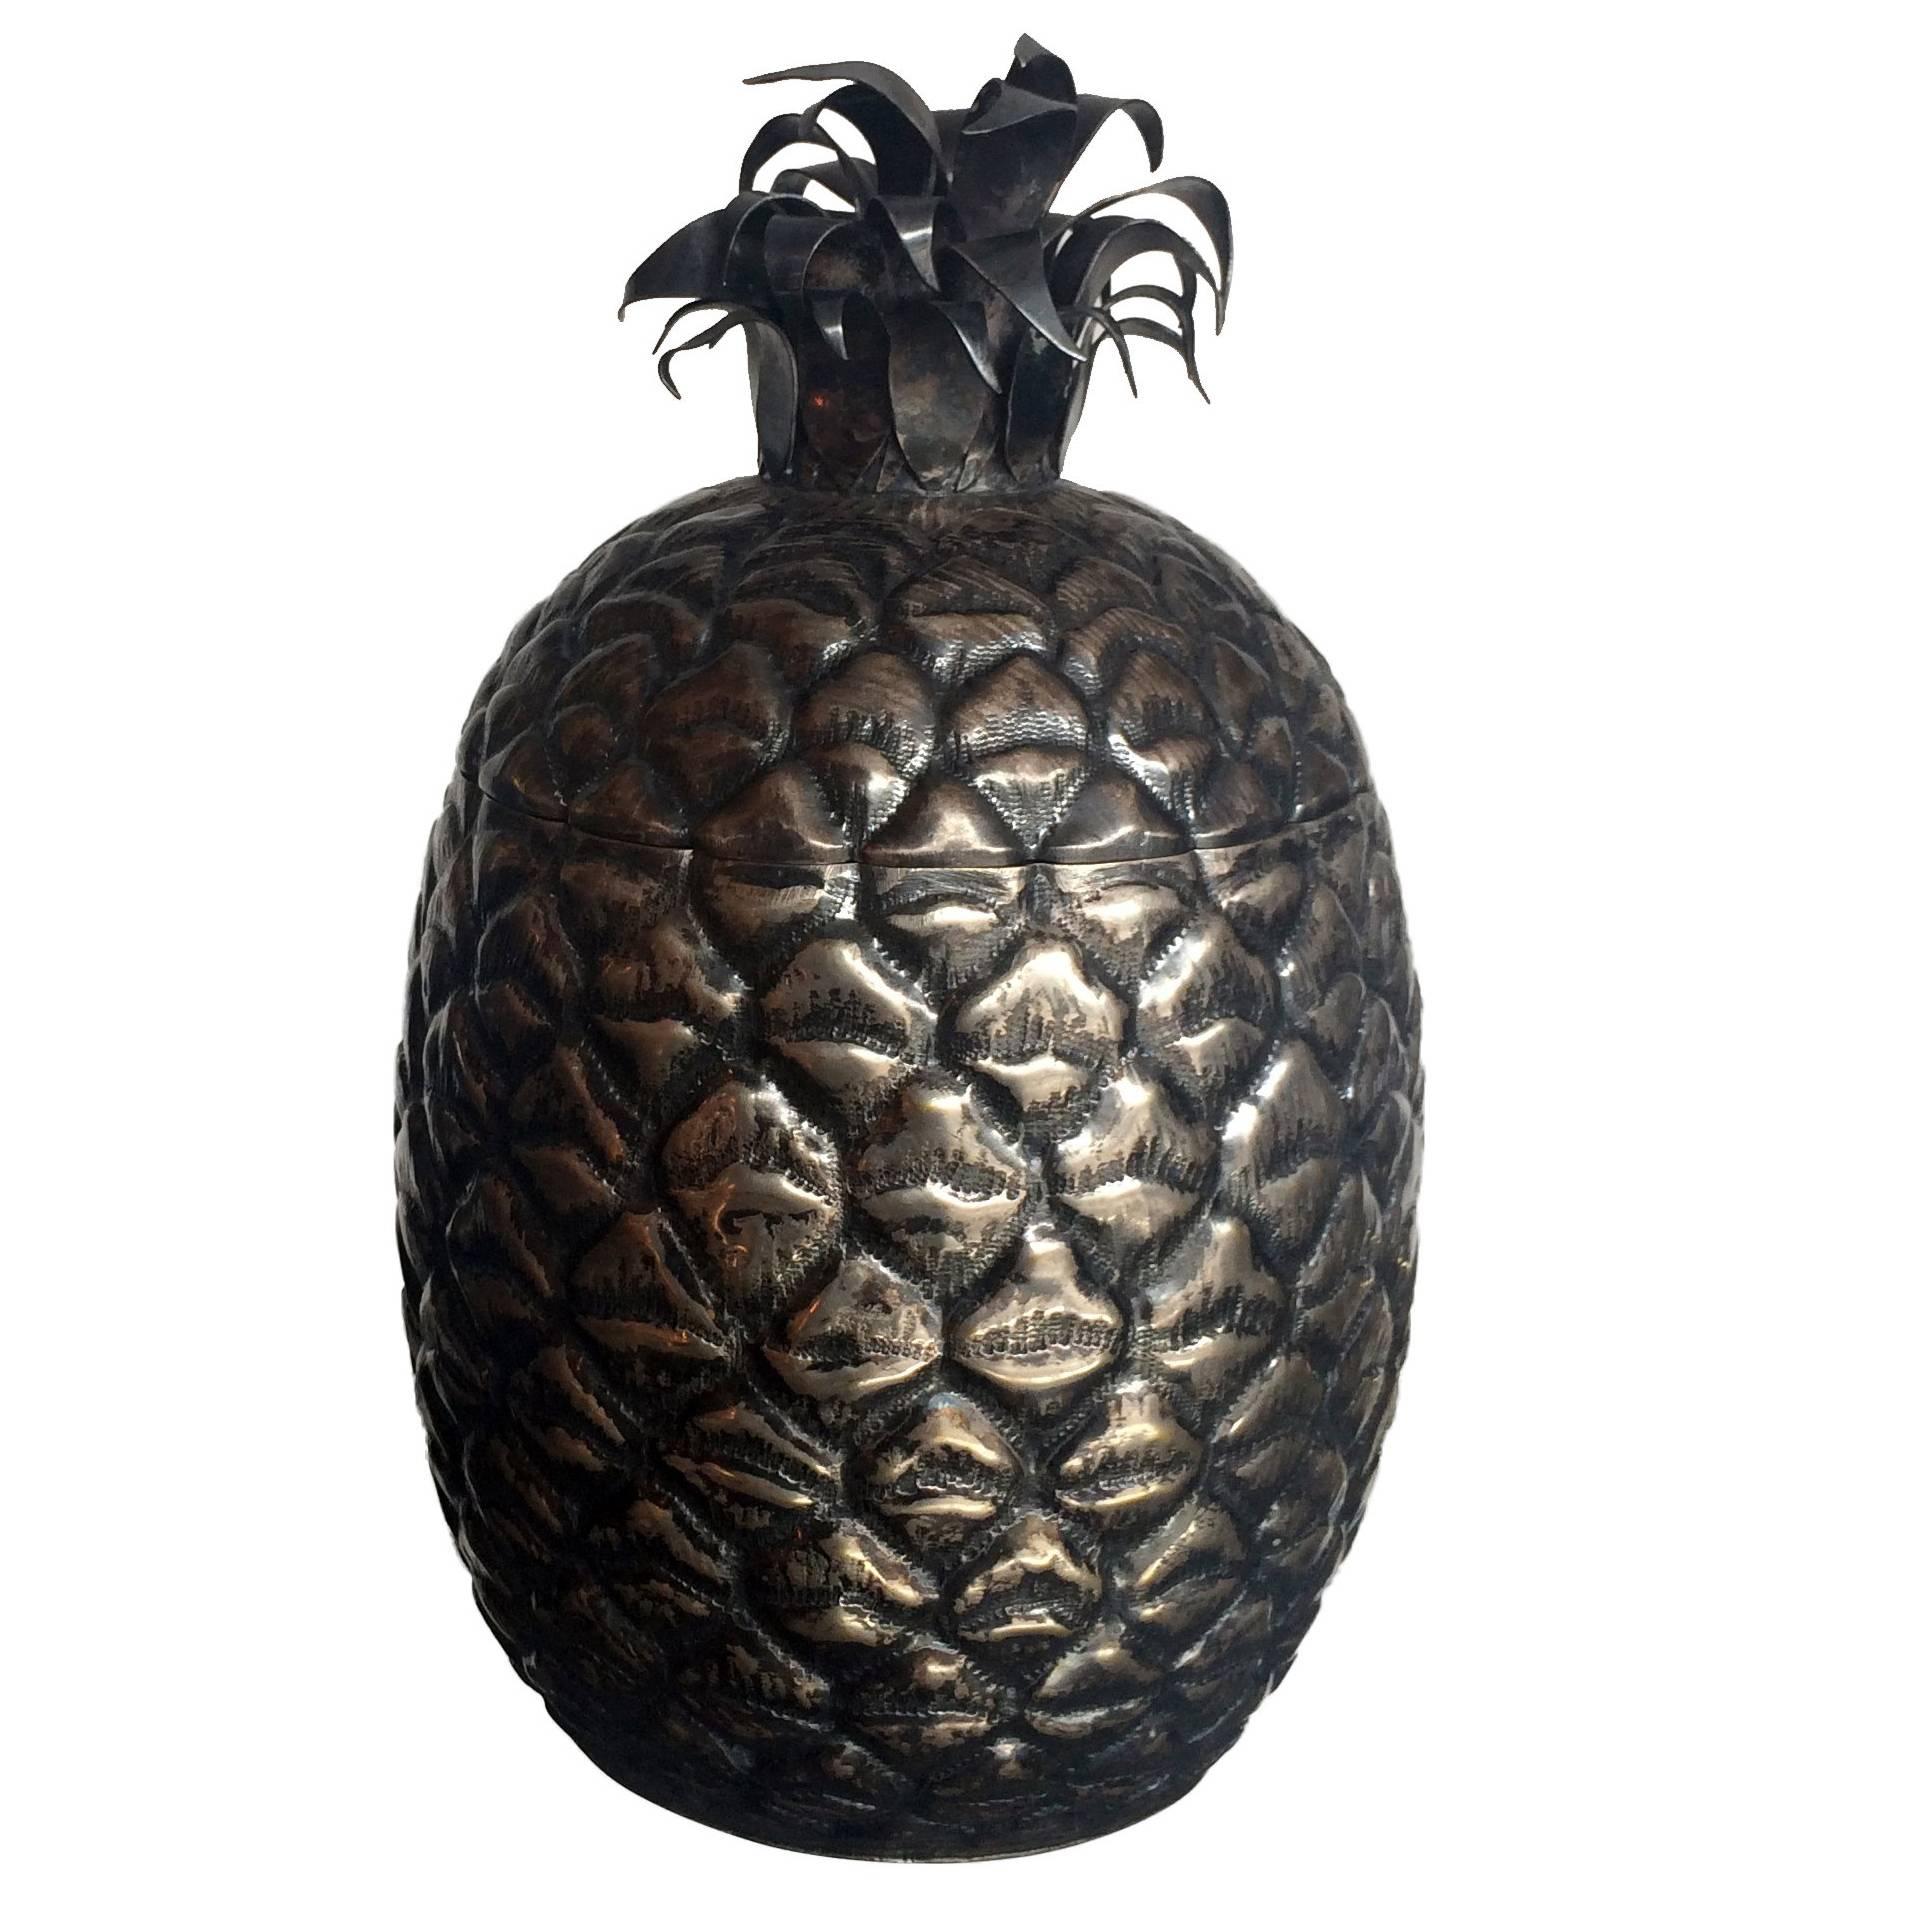 Large Pineapple Ice Bucket or Cooler